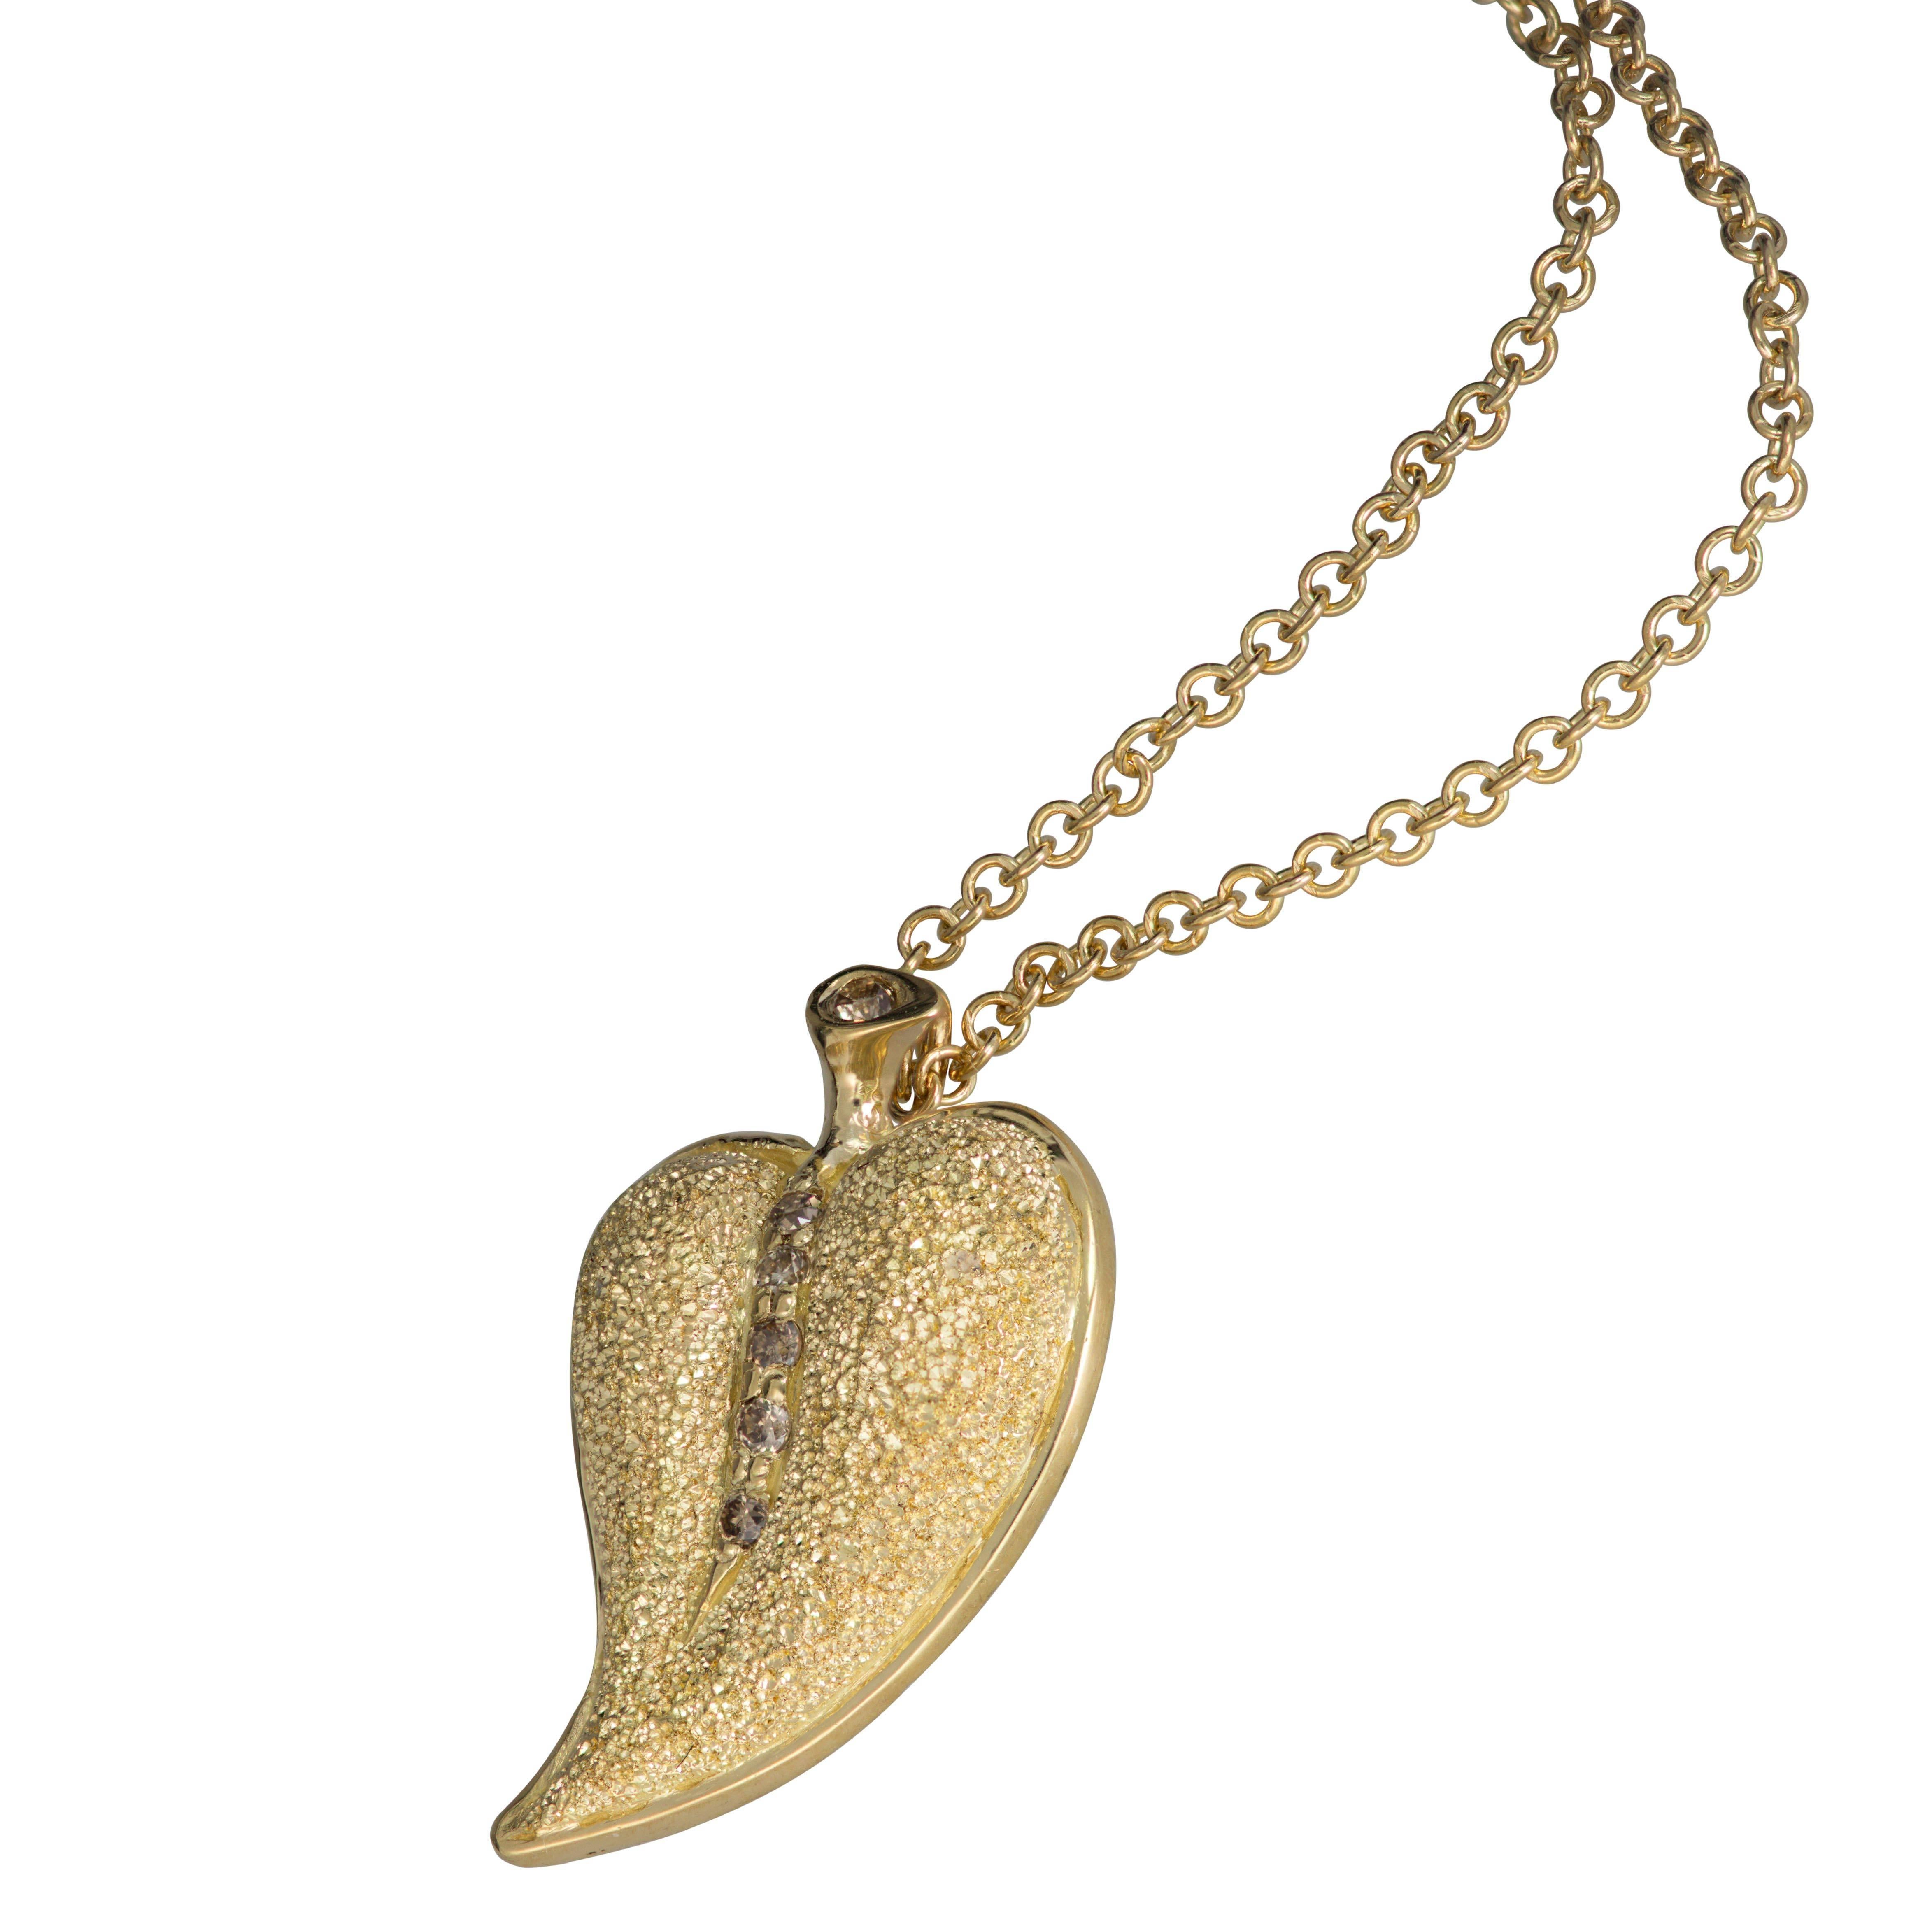 Alex Soldier Leaf pendant is made in 18 karat yellow gold with champagne diamonds (0.05 ct) and signature metalwork that creates an illusion of a diamond inlay. Handmade in NYC. Limited Edition. (includes 18 karat gold chain, 18 inches).   

About